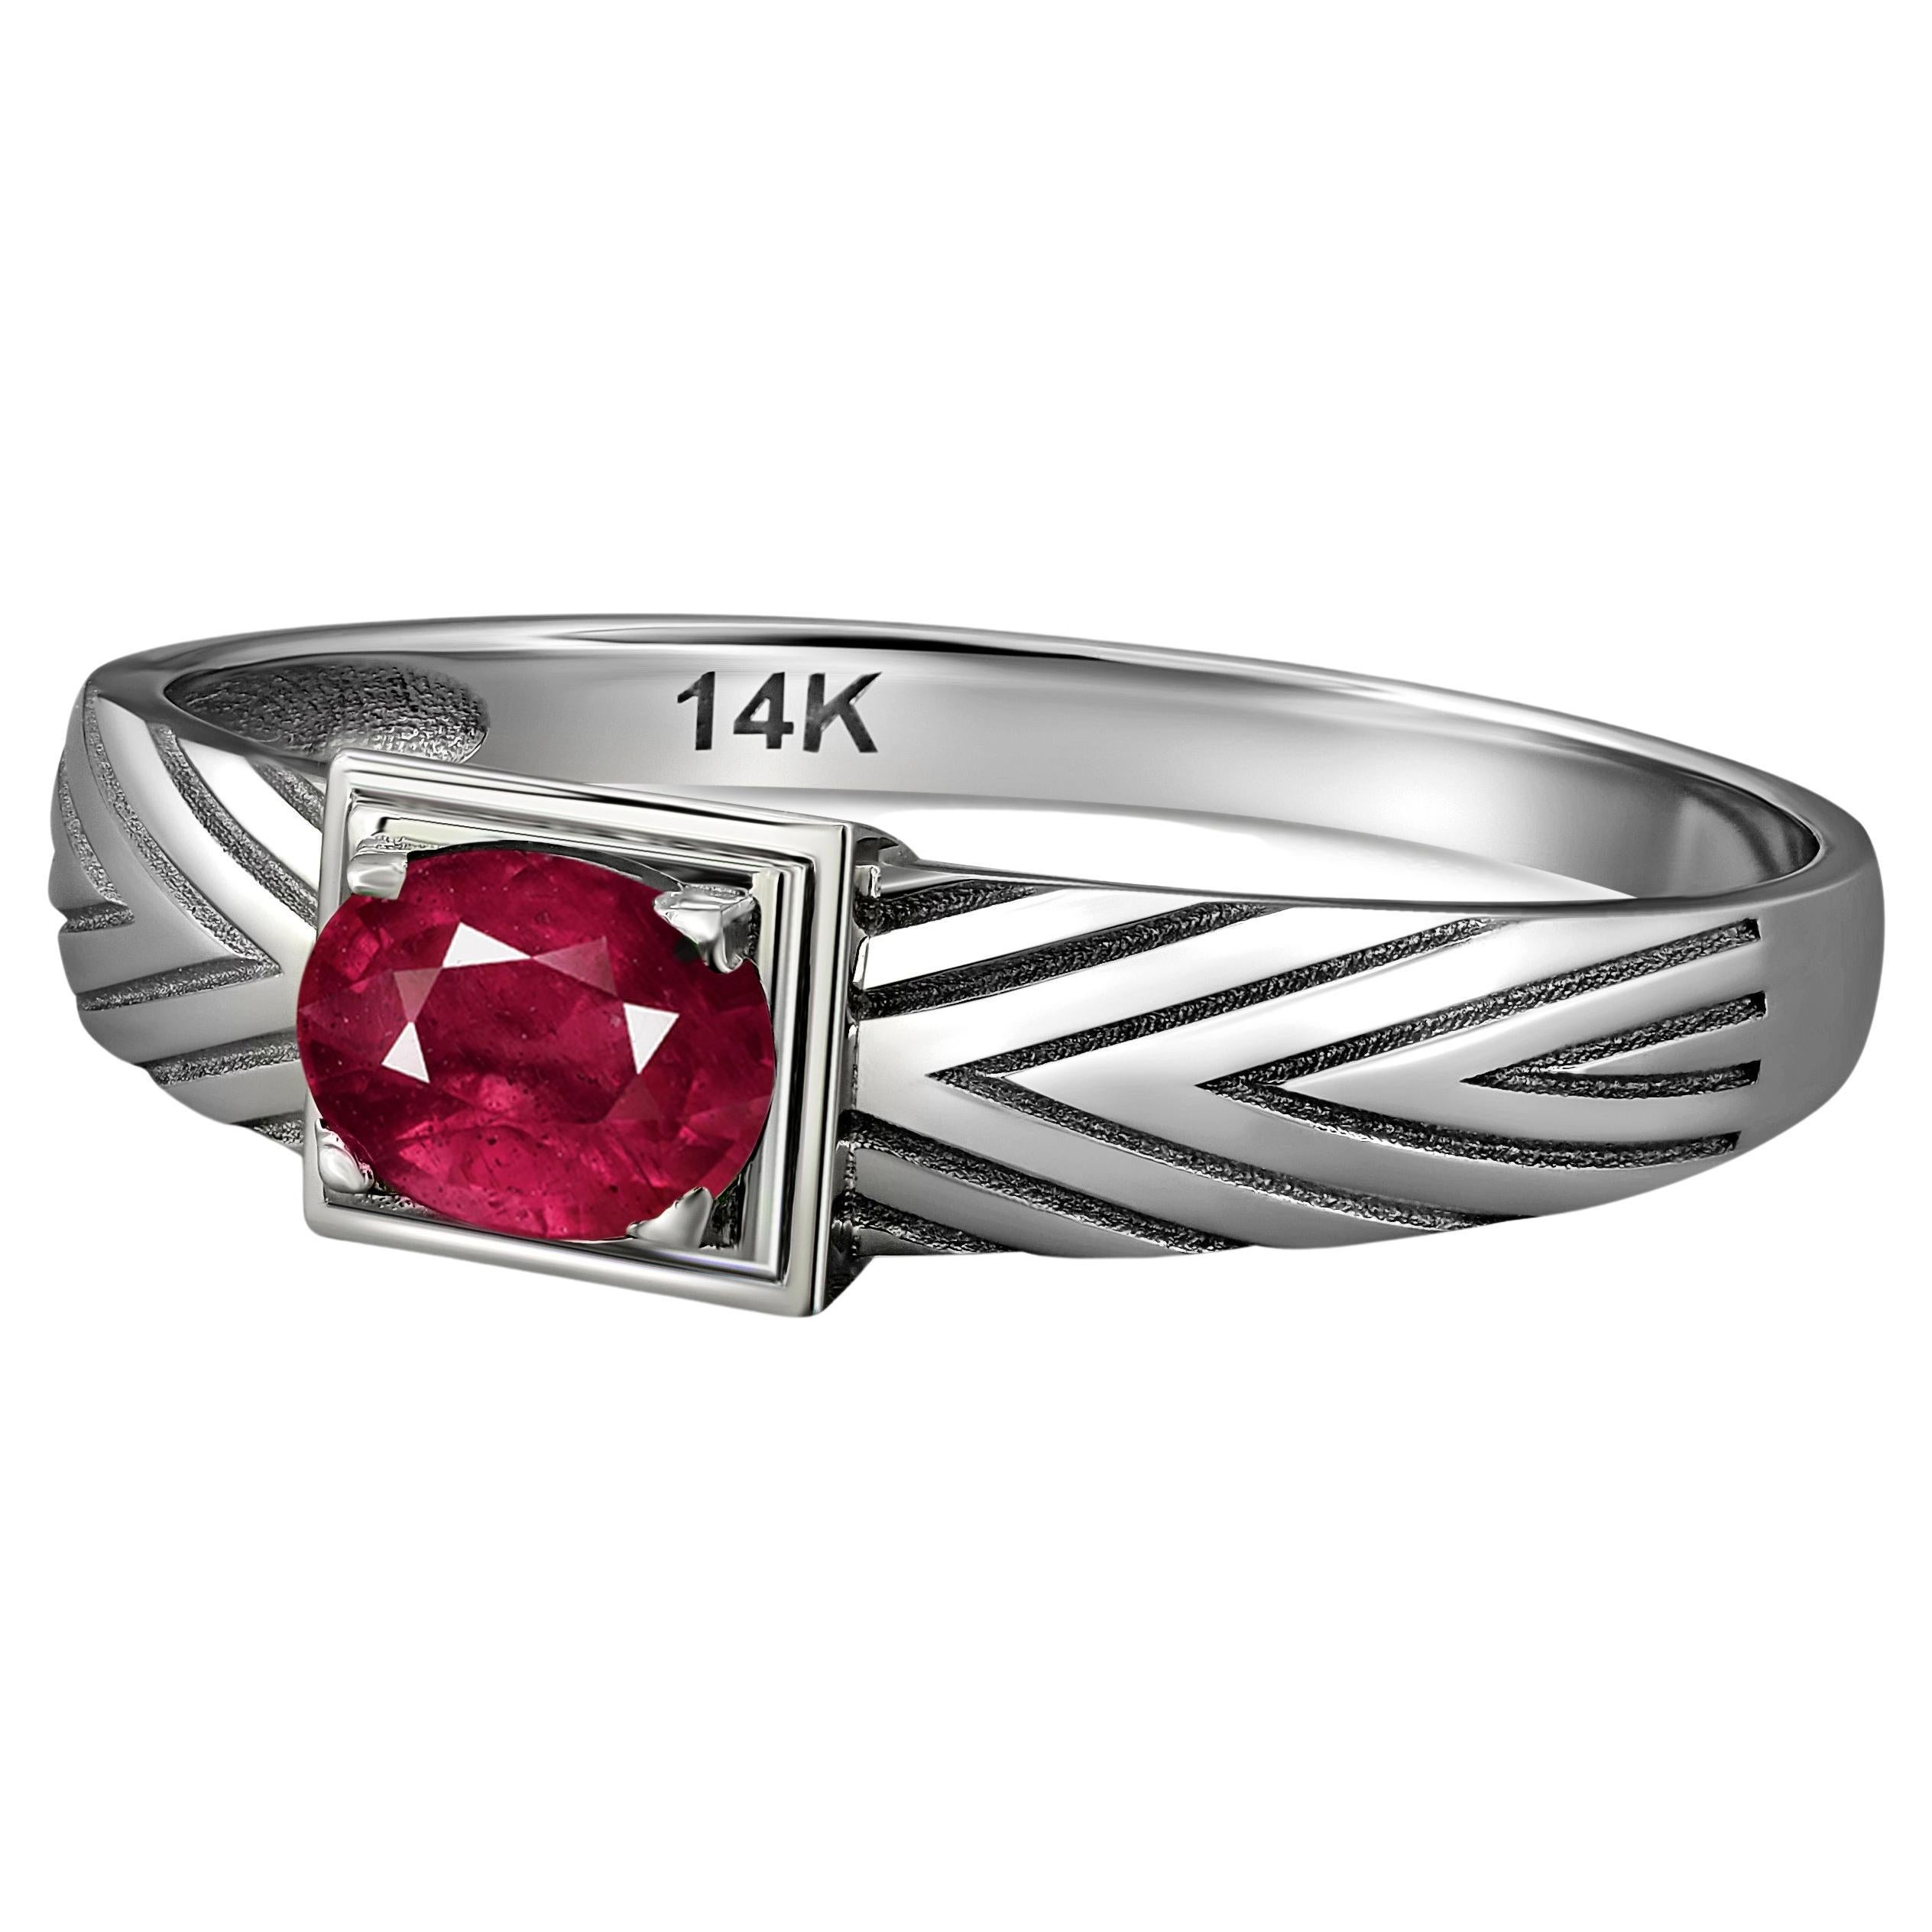 14 Karat Gold Mens Ring with Ruby. Gold Ring for Men with Ruby